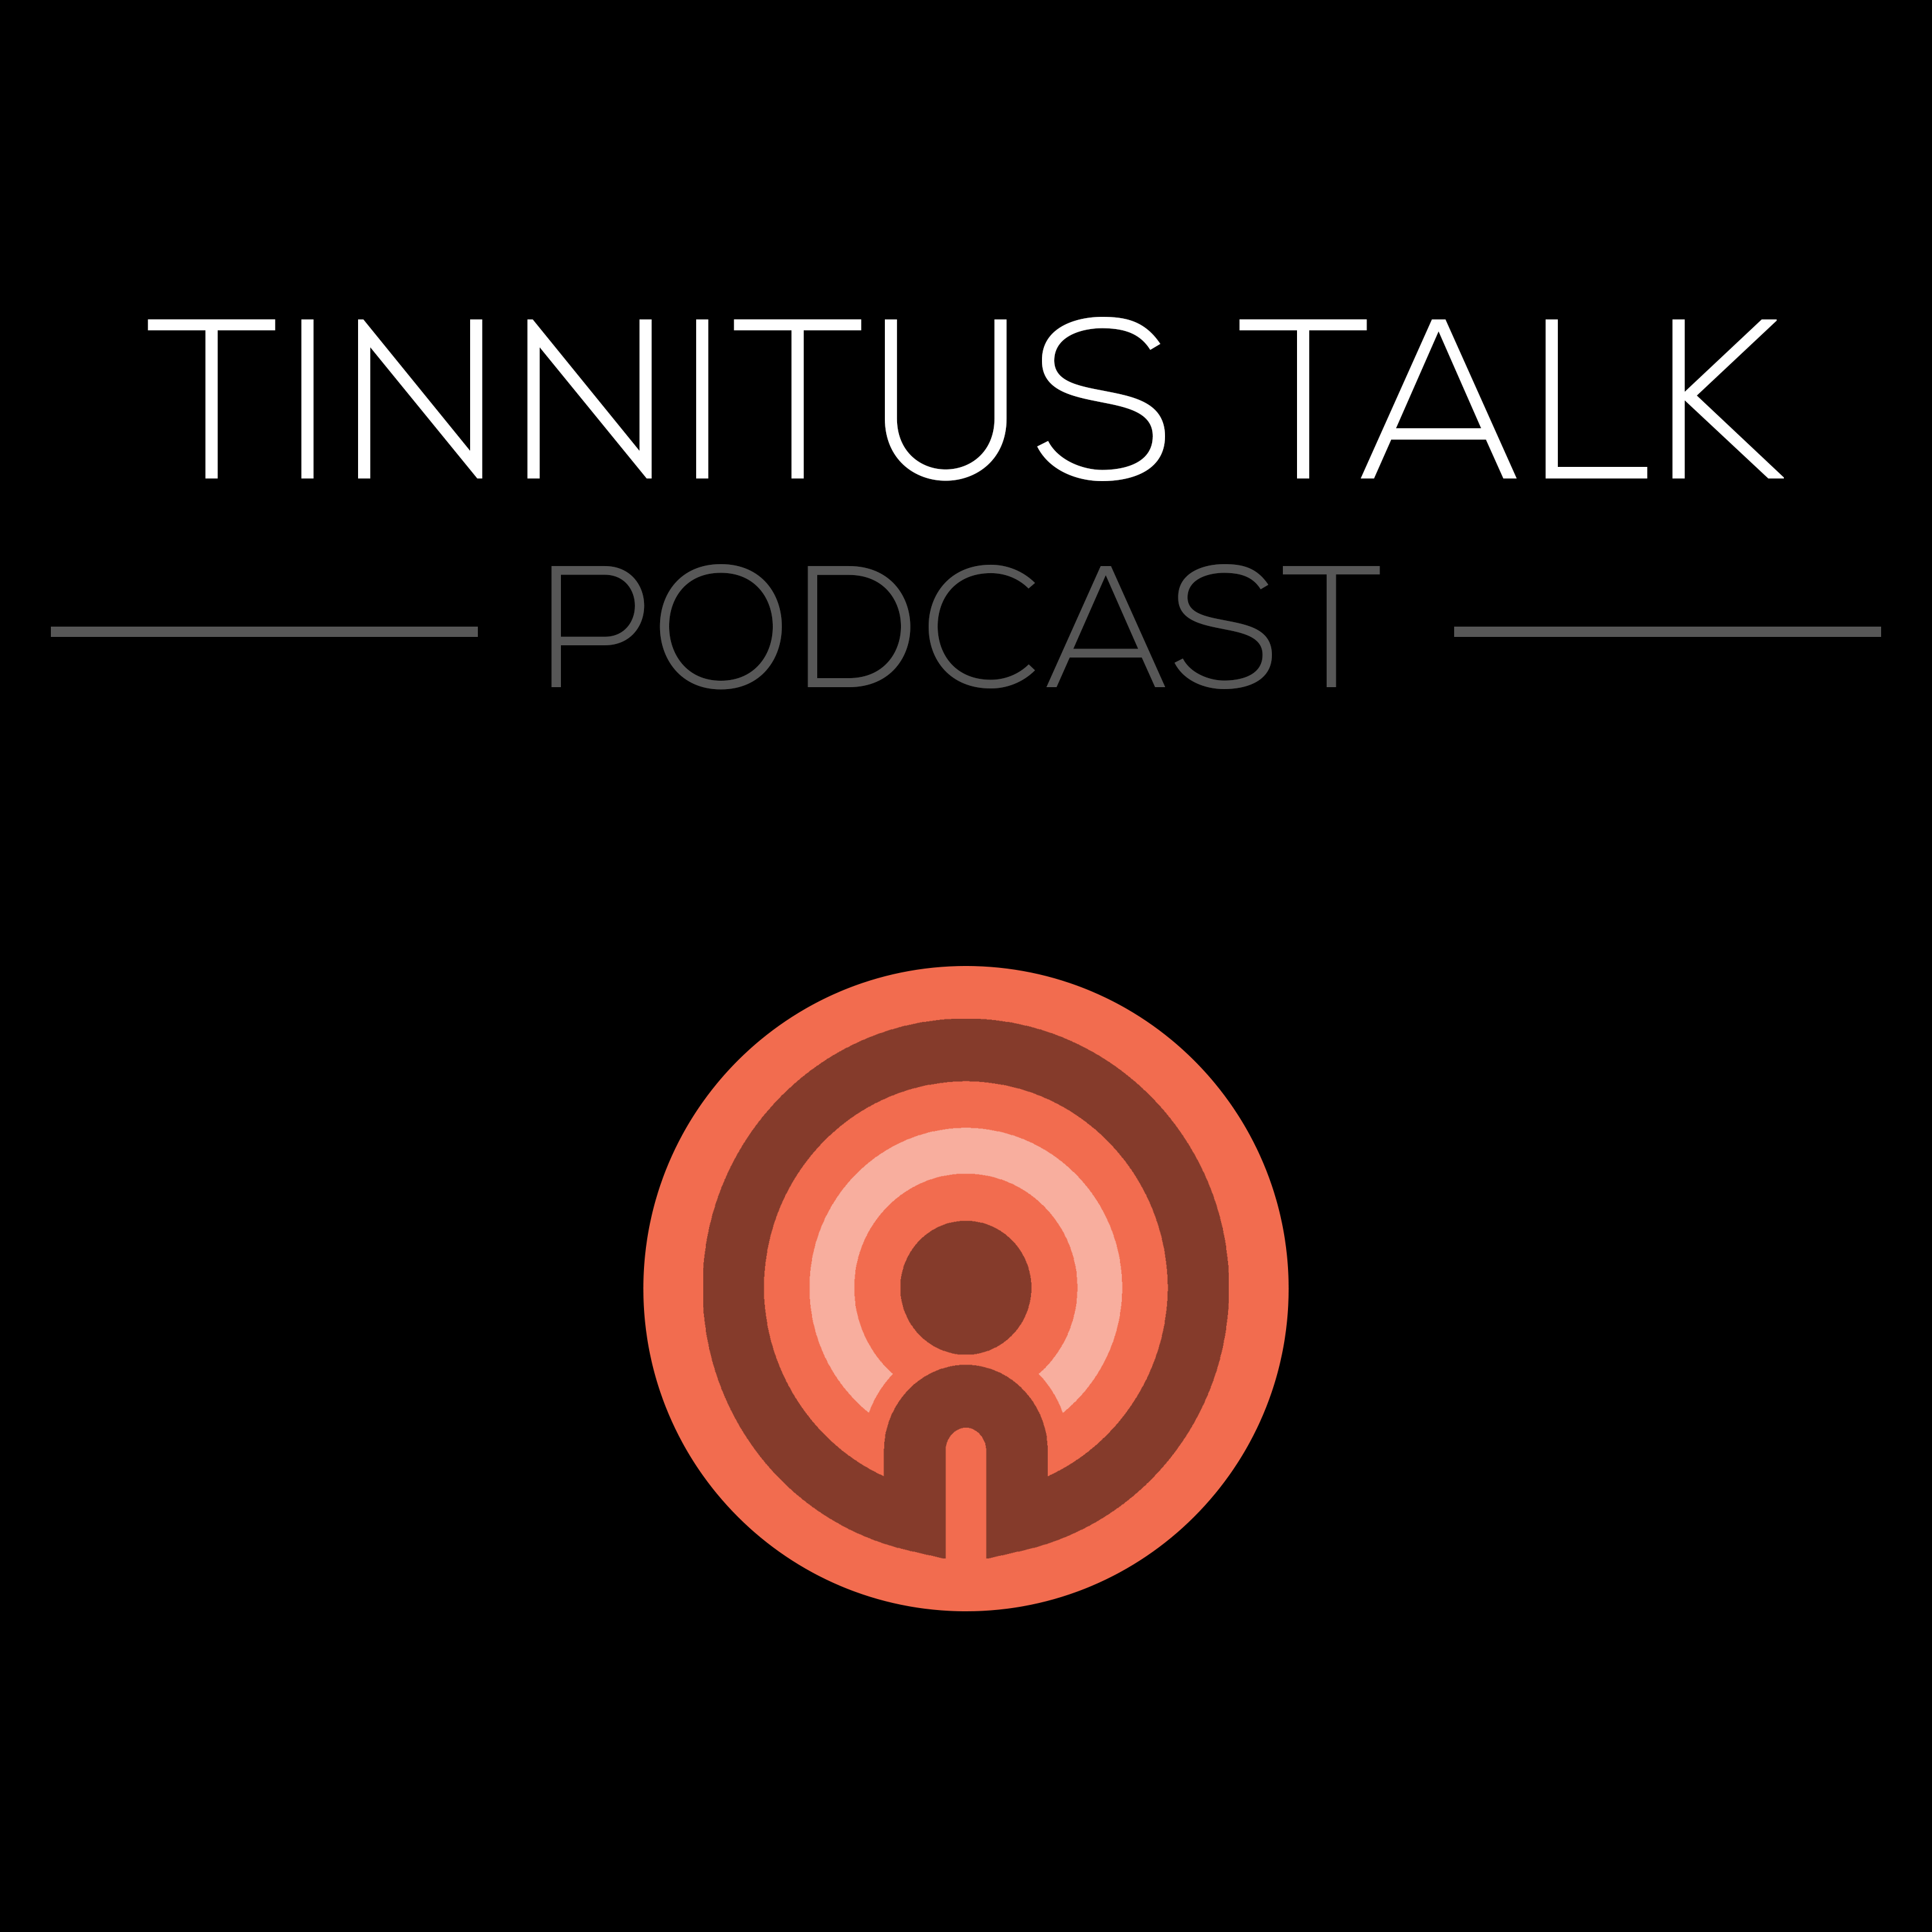 Clinical Guidelines for Tinnitus - Status Quo or Way Forward?